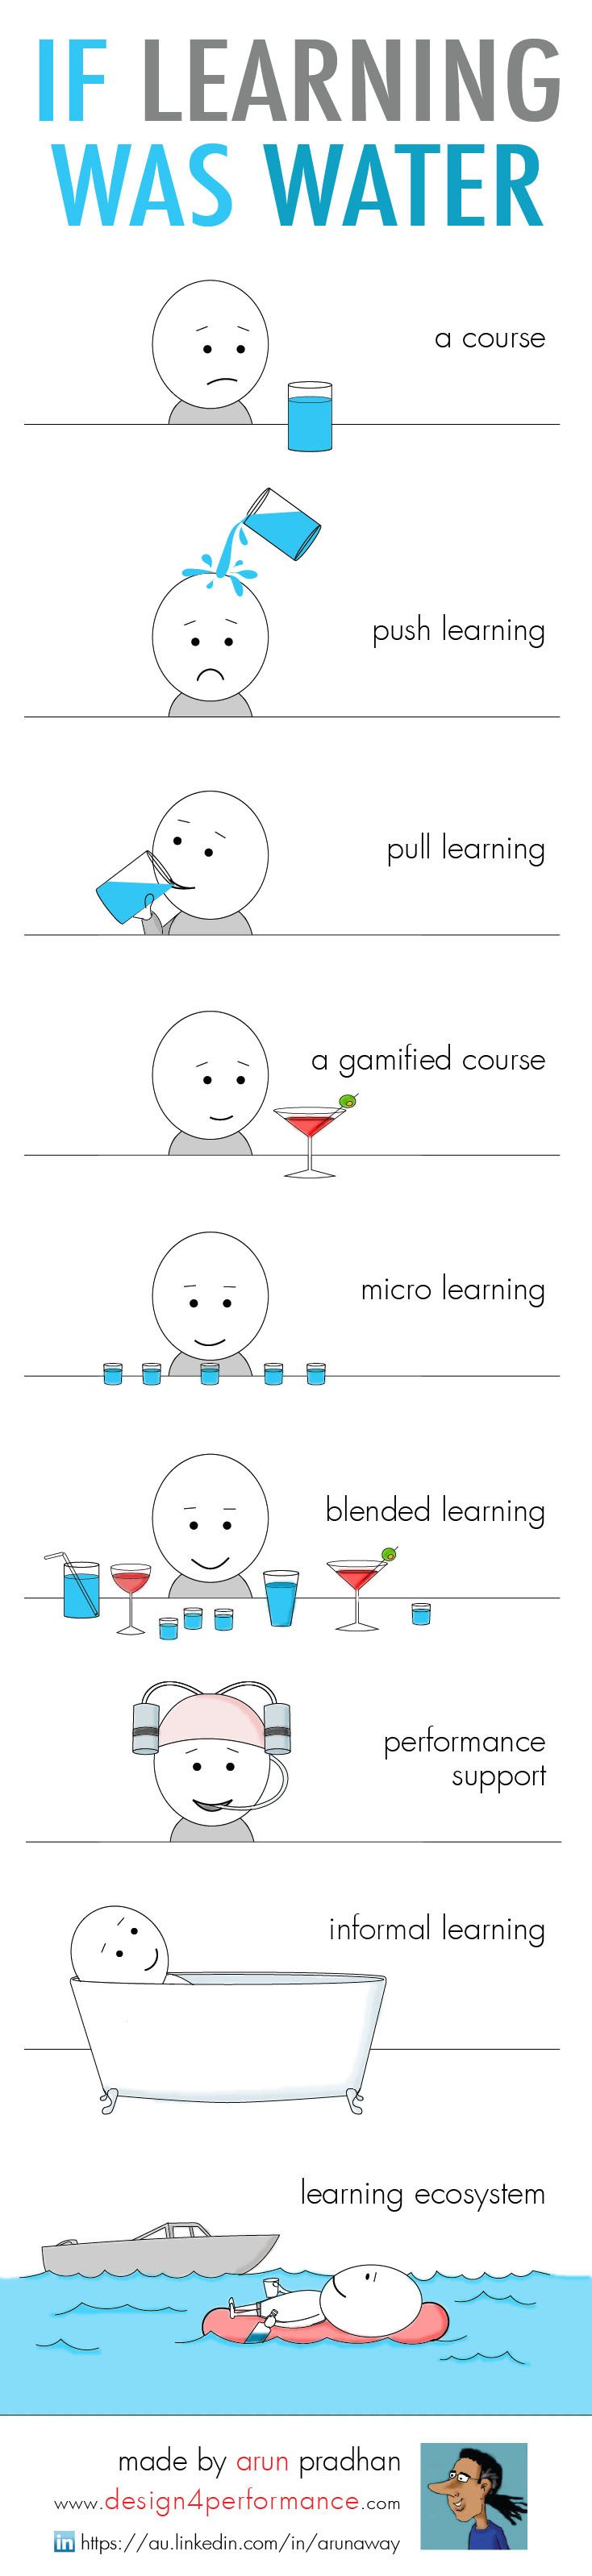 If Learning Were Water Infographic